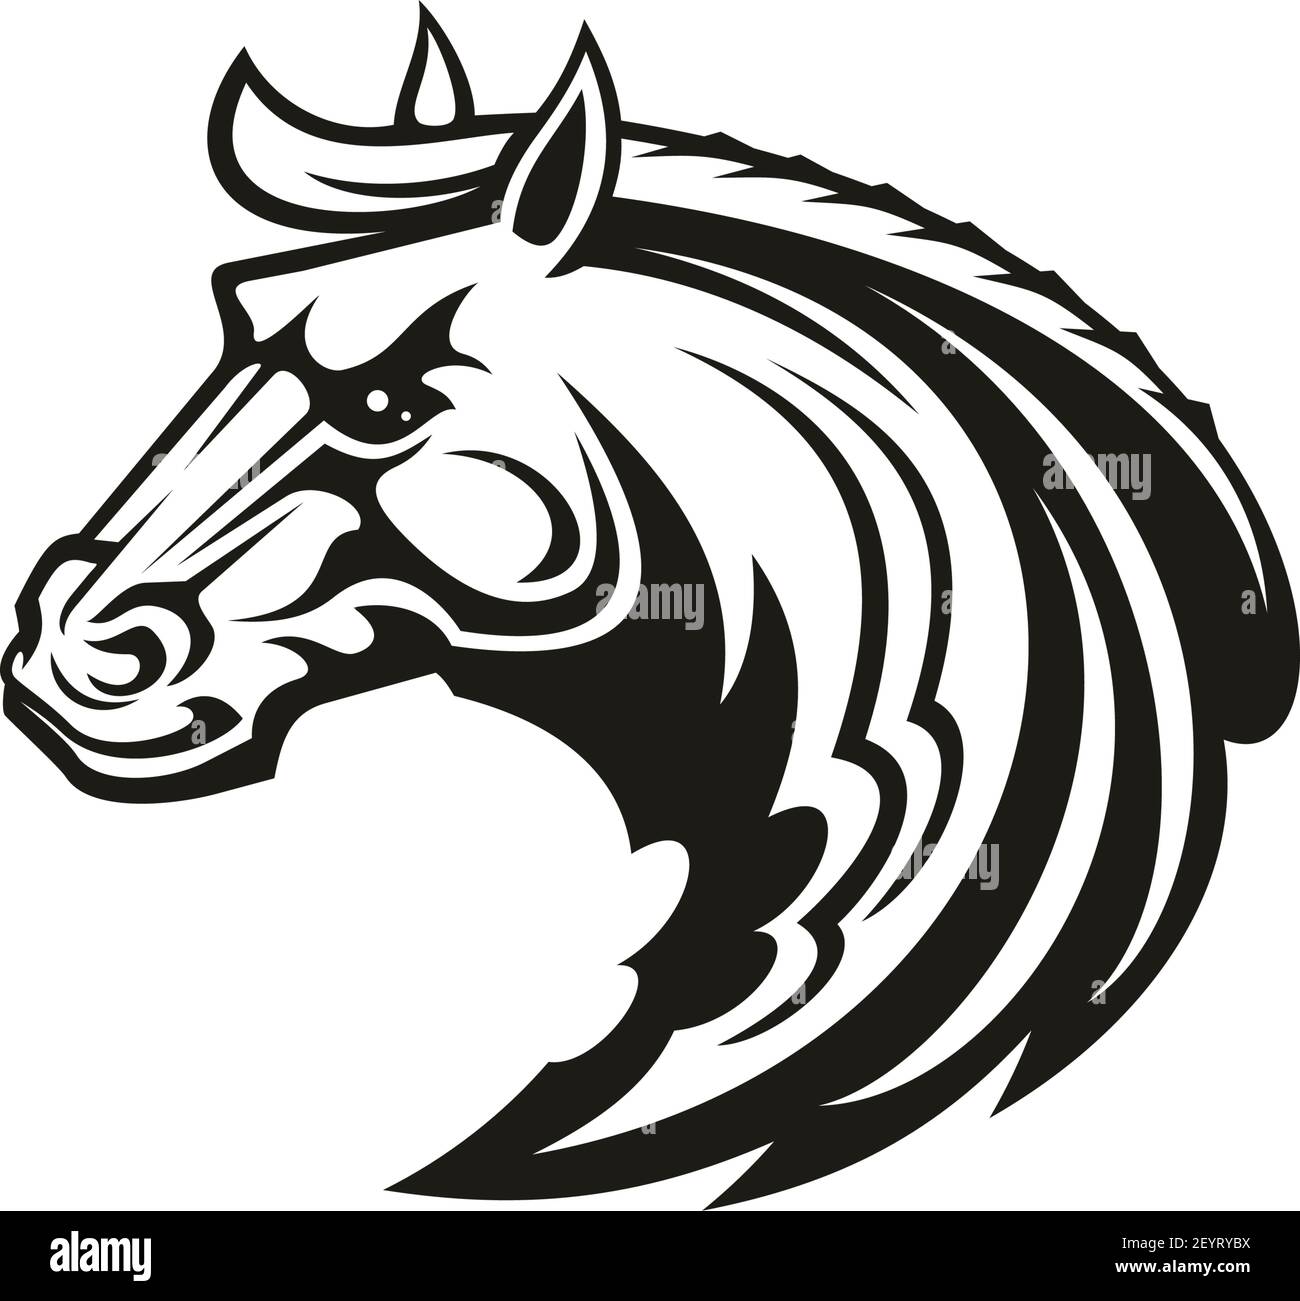 Premium Vector  Furious powerful horse head emblem with thorny prickly  mane stylized heraldic icons of raging stallion black mustang symbol for  sport club team badge label tattoo